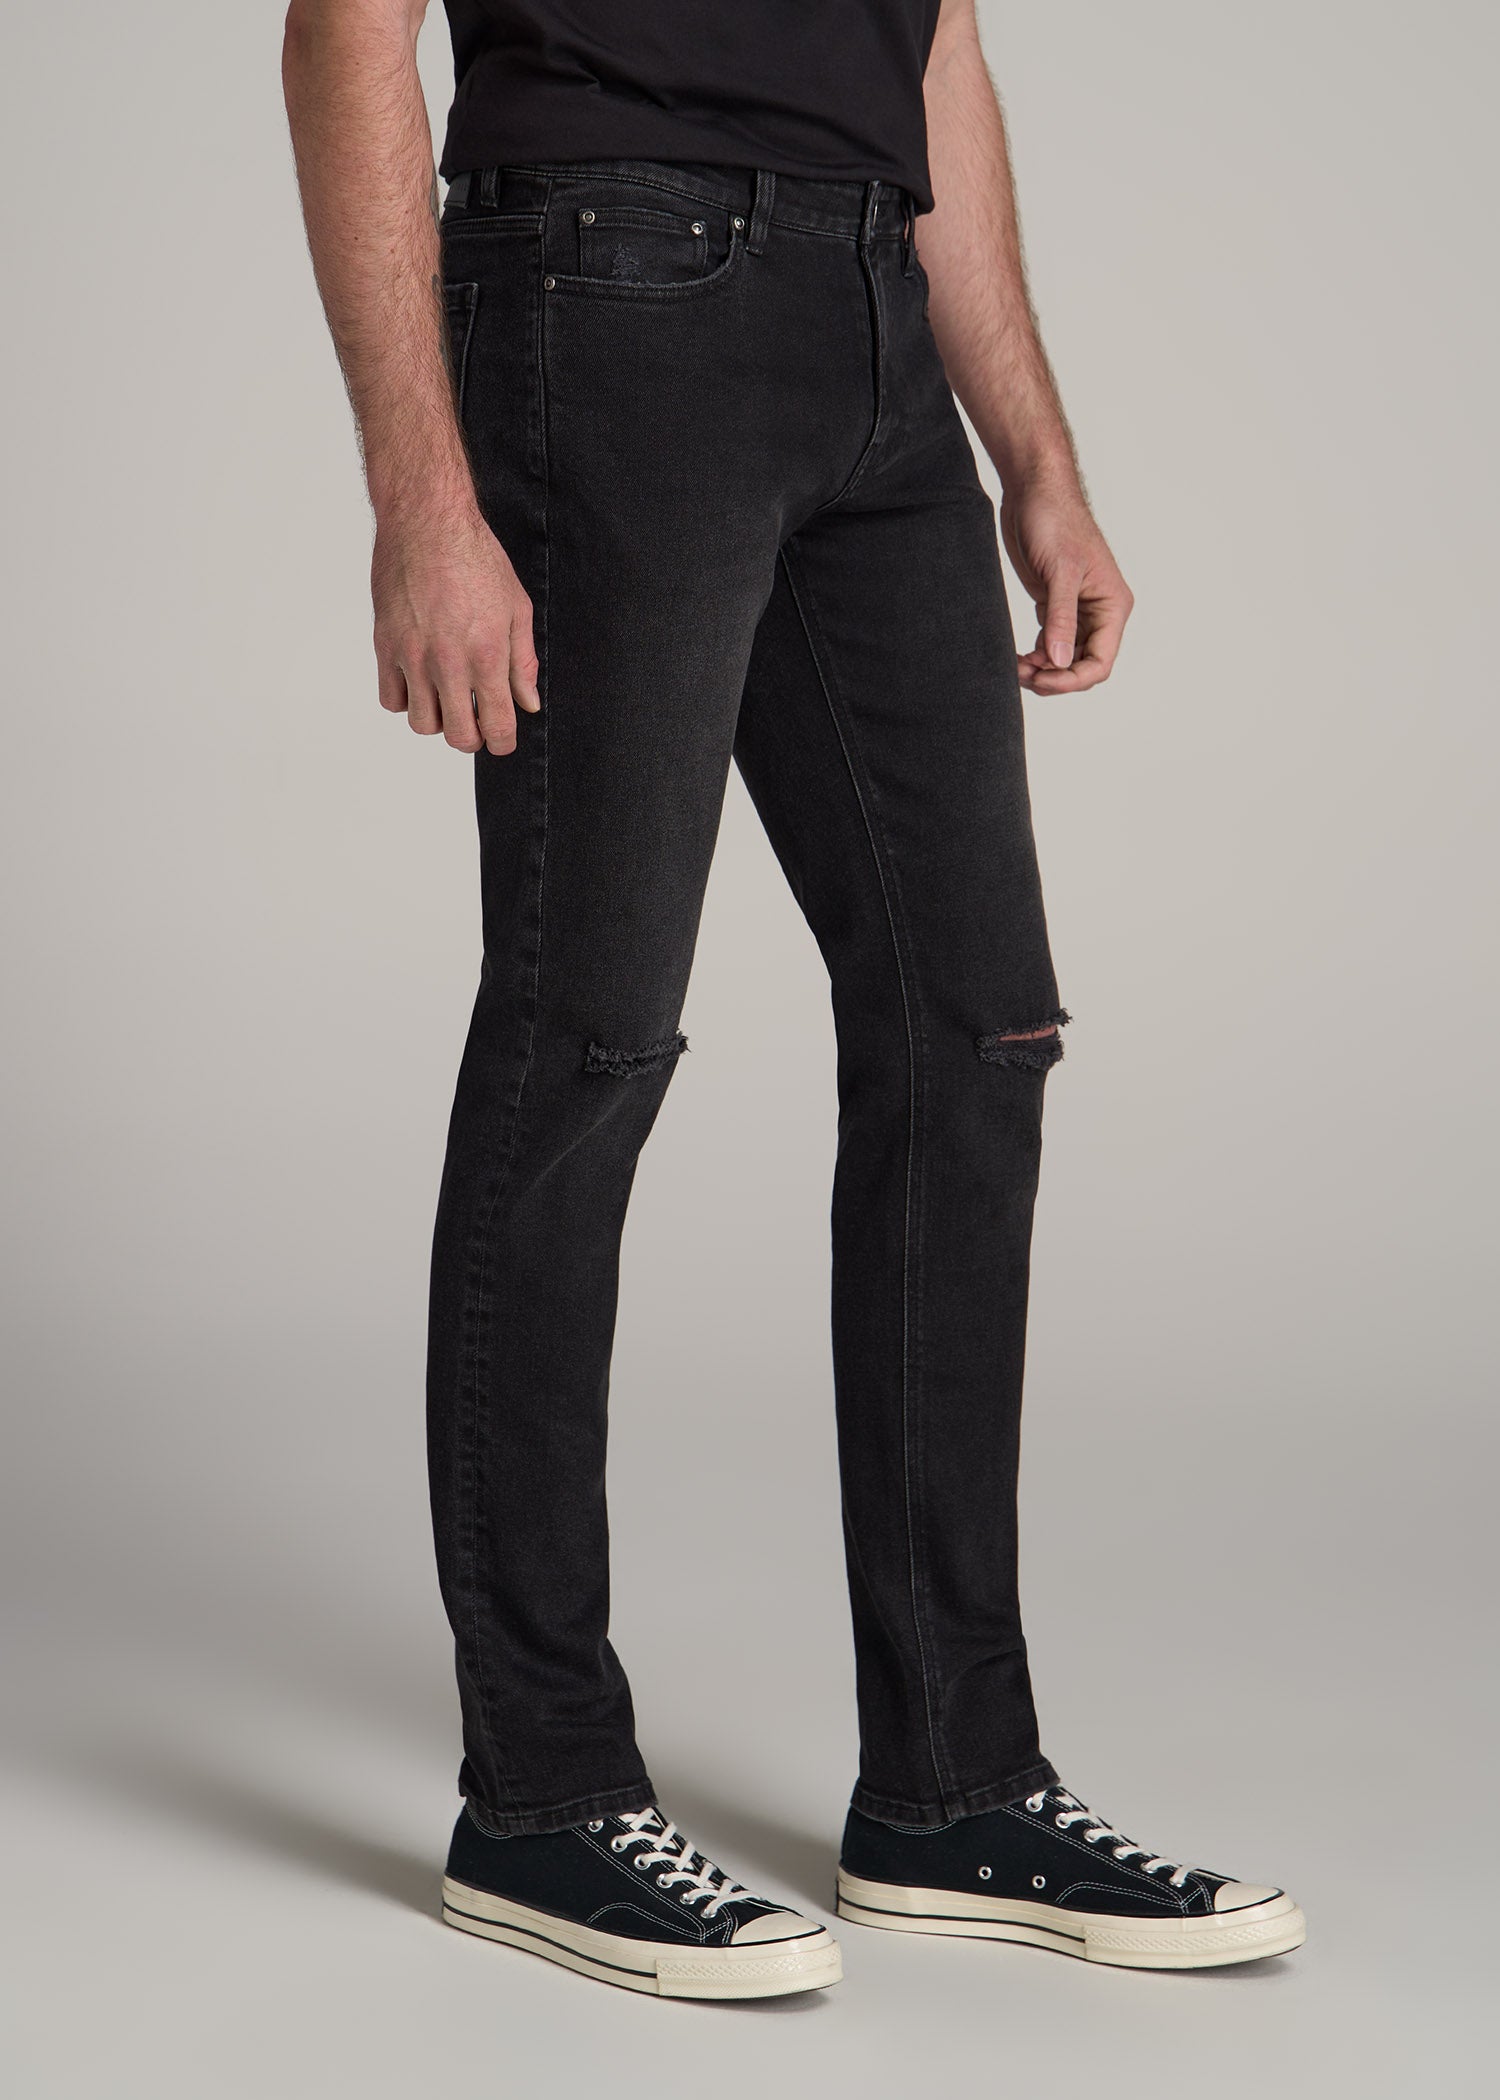 Dylan Slim-Fit Jeans for Tall Men | American Tall